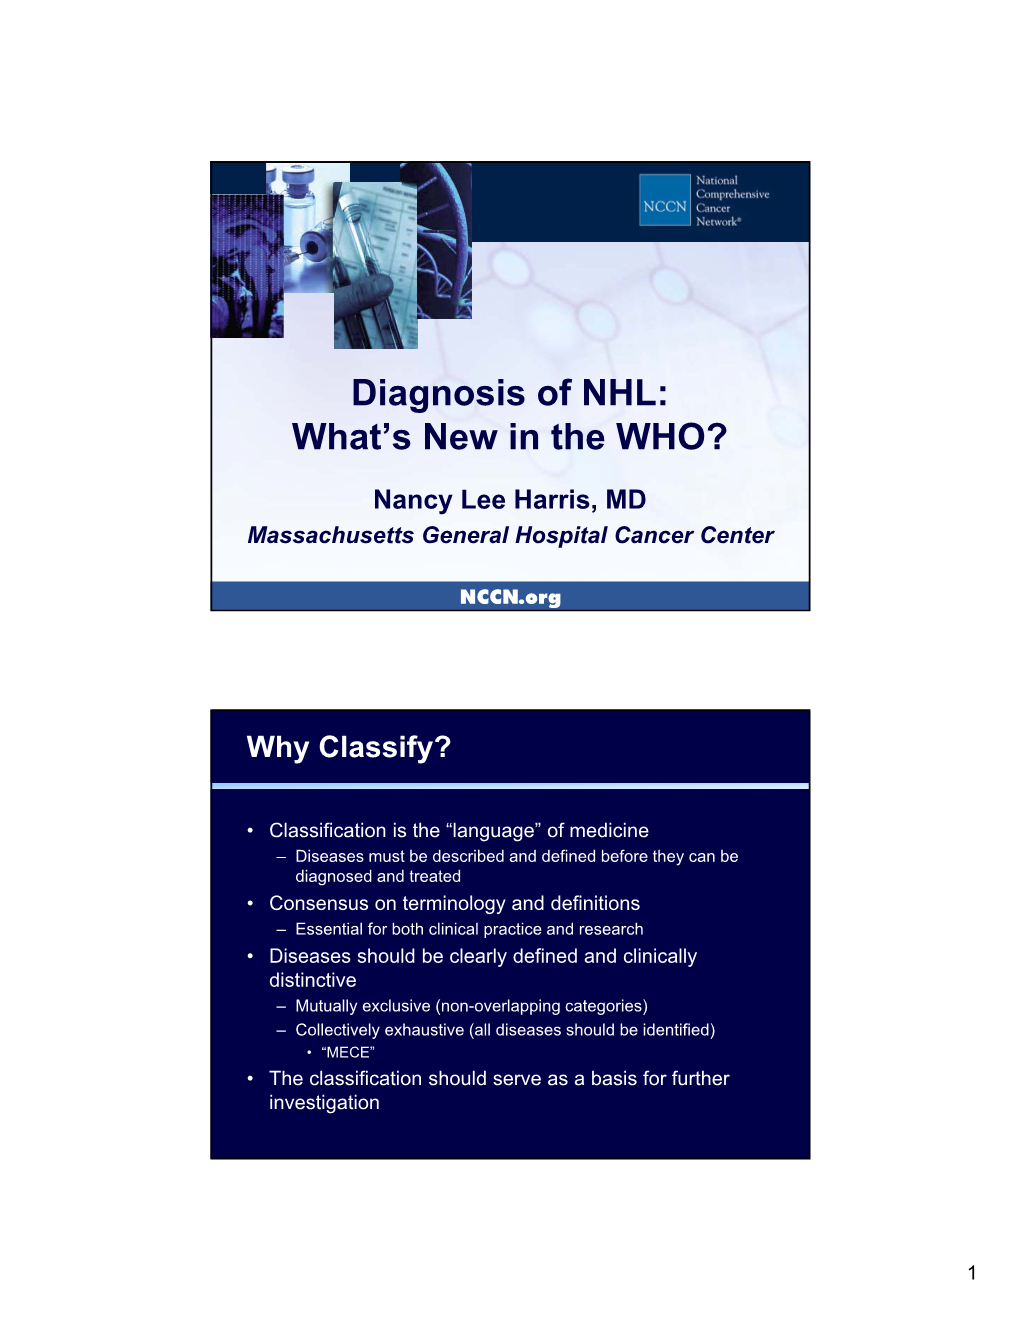 Diagnosis of NHL: What's New in the WHO?